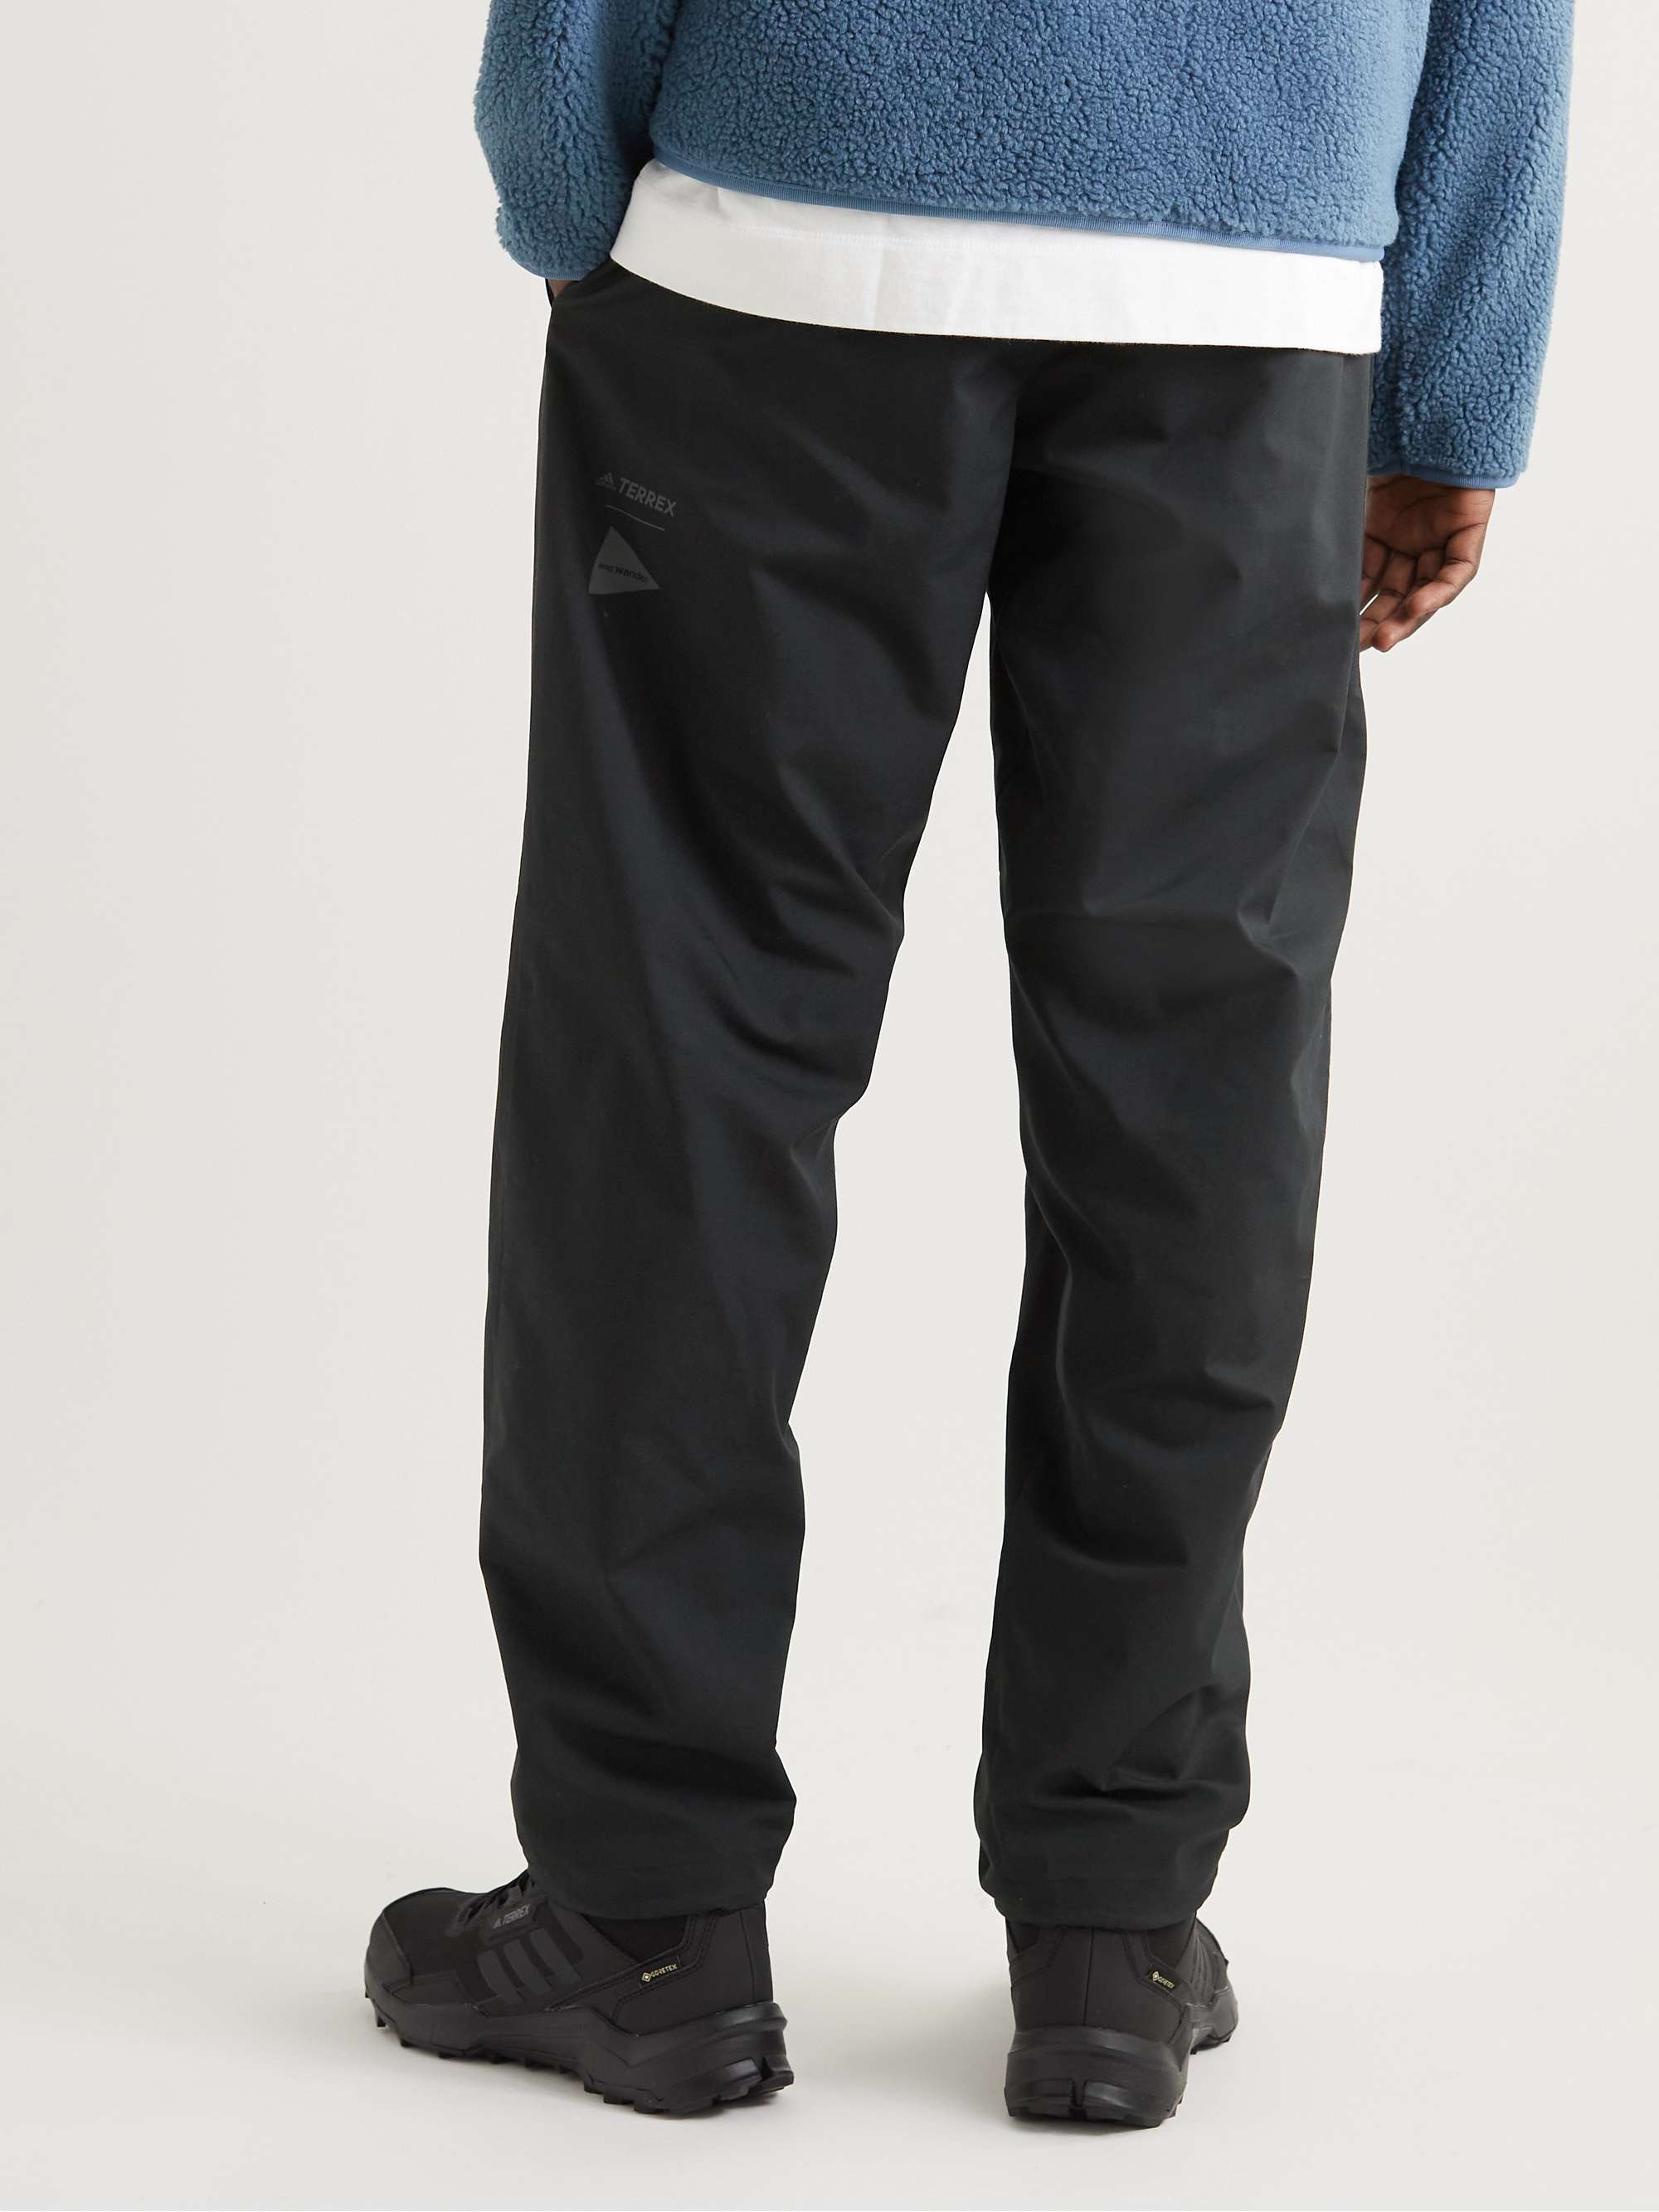 ADIDAS CONSORTIUM + And Wander Cotton-Blend Ripstop Trousers | MR PORTER